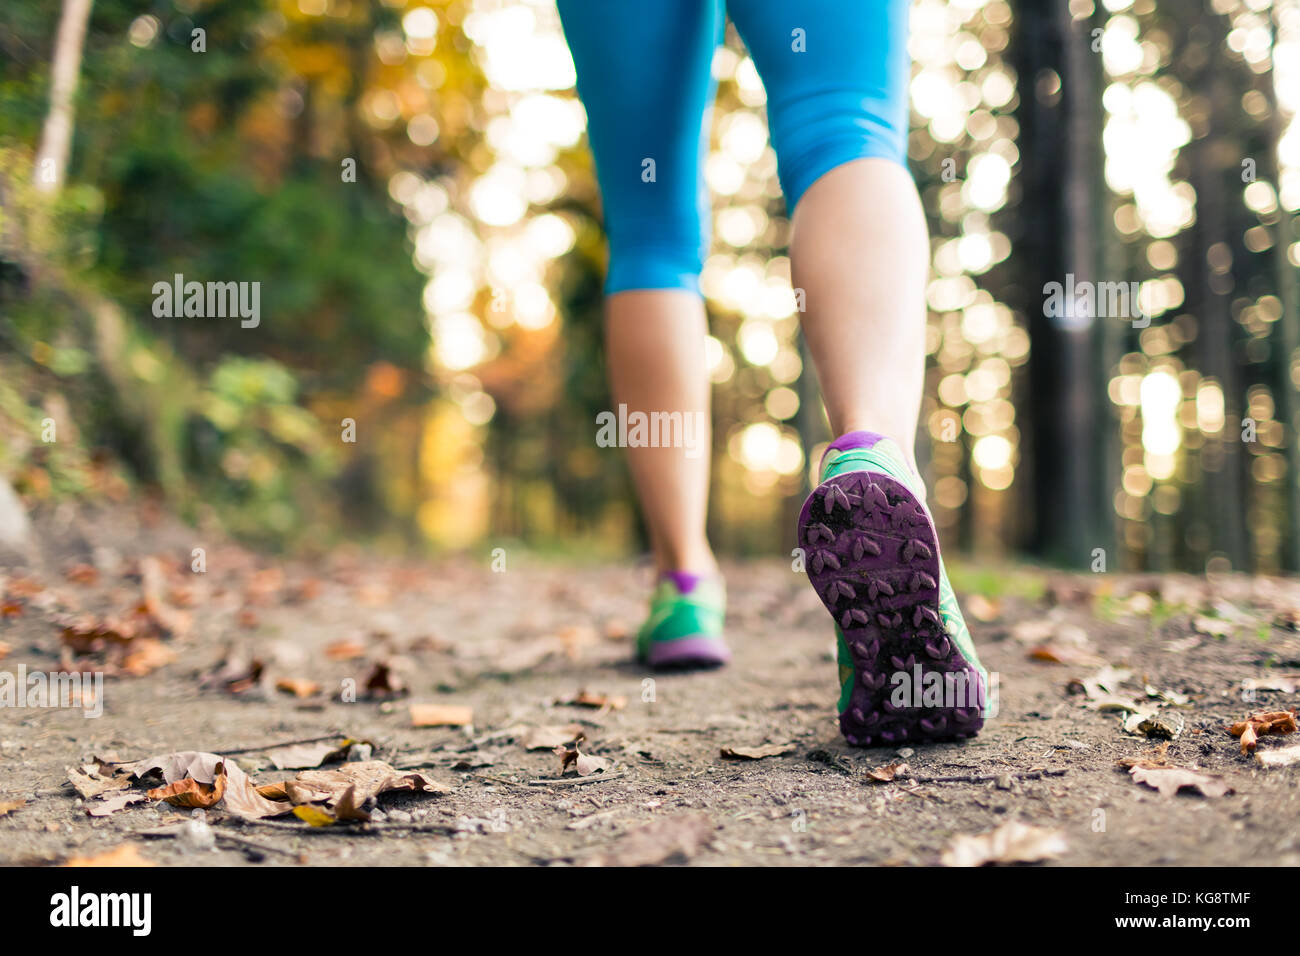 Woman walking and hiking in autumn forest, sport shoes. Jogging, trekking or training outside in autumn nature. Inspiring health and fitness concept. Stock Photo